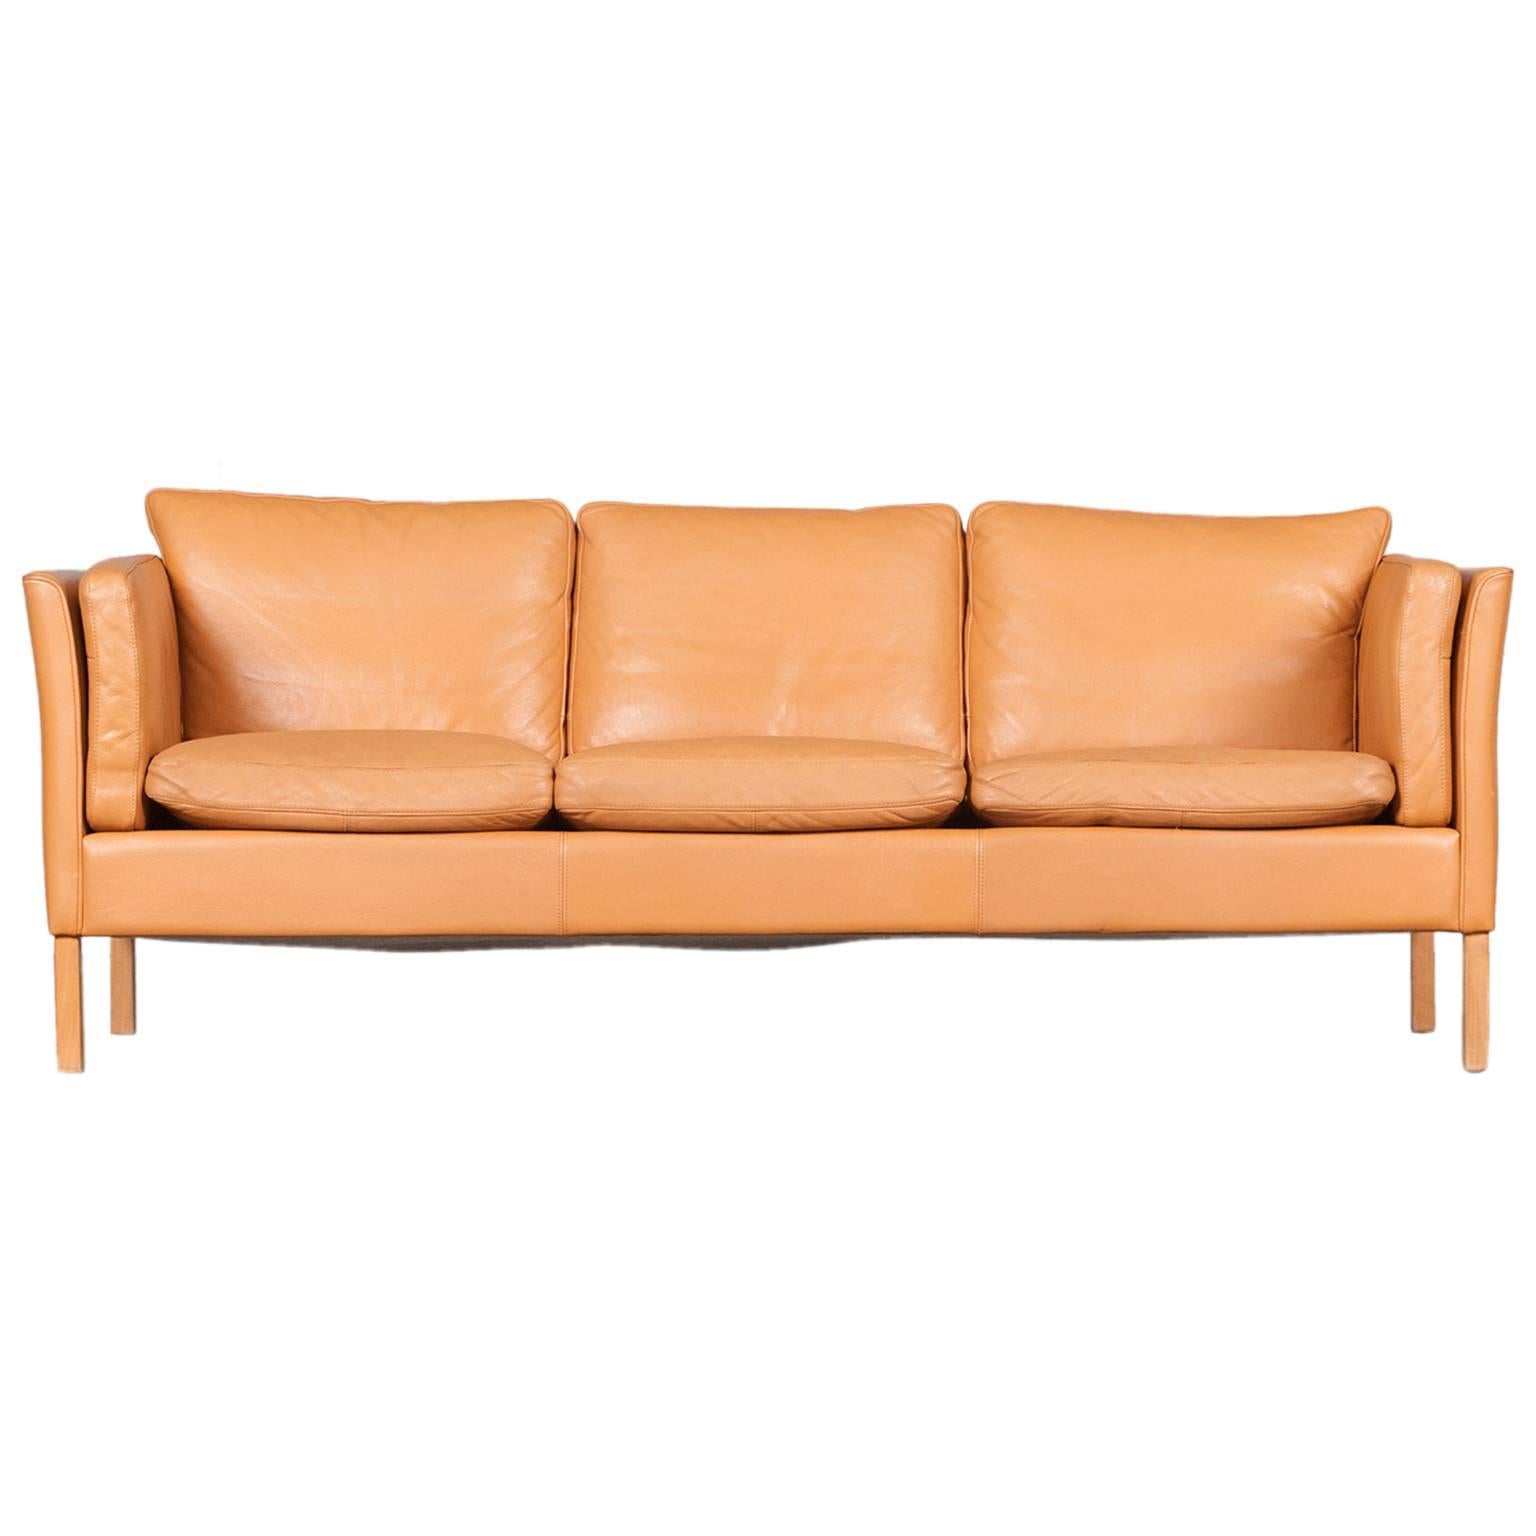 Danish Three-Seater Sofa in Honey Tan Leather, 1960s For Sale